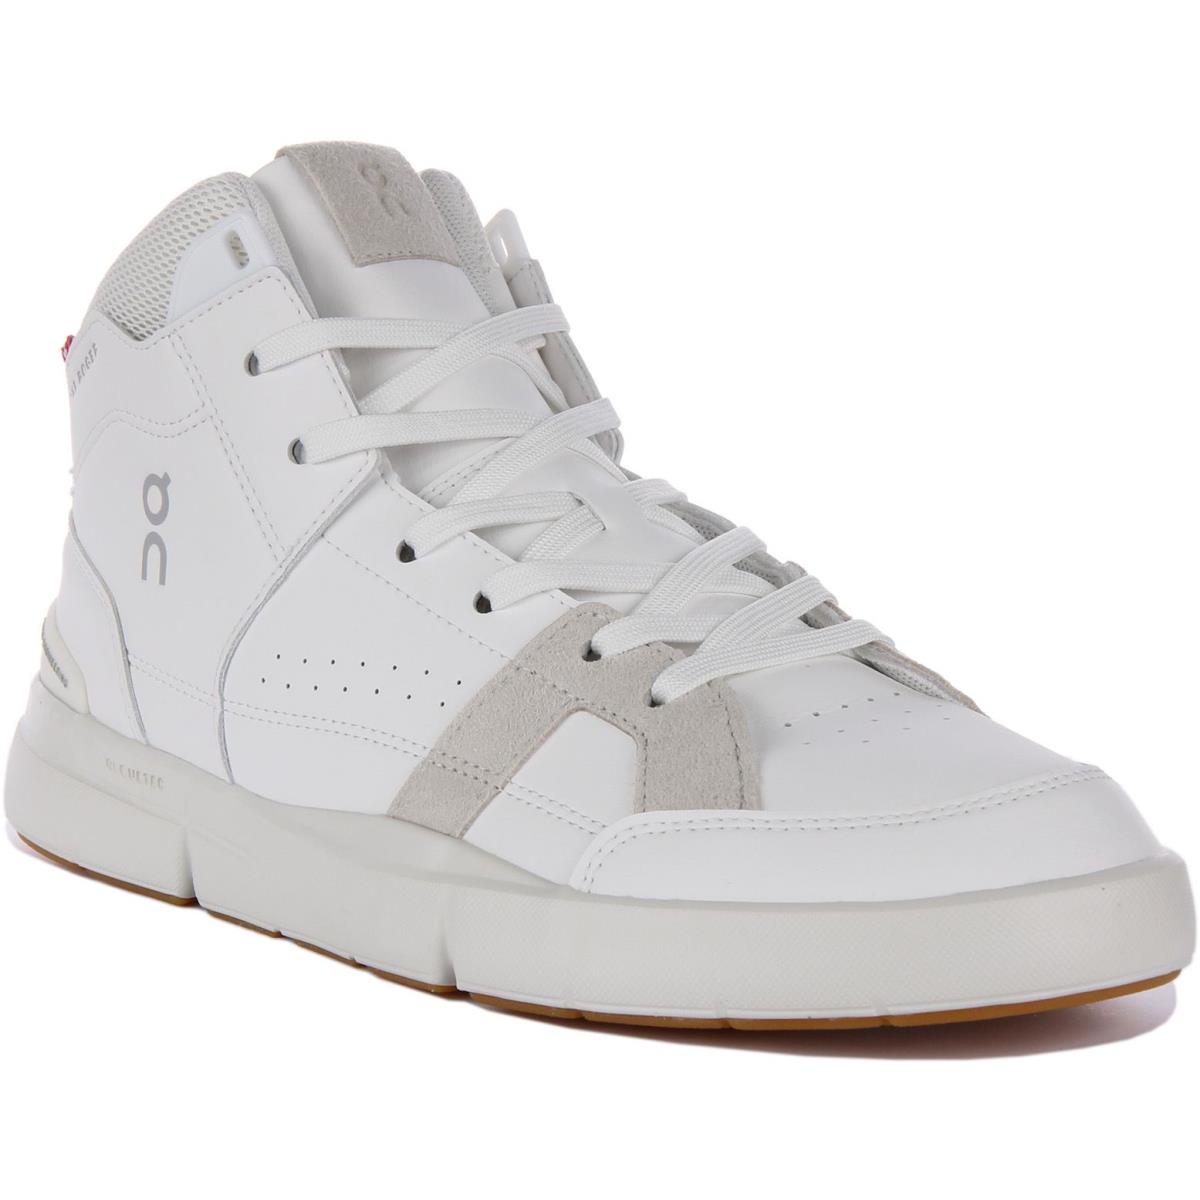 On Running The Roger Club House Tennis Mid Top Sneaker White Grey Mens US 7 - 13 WHITE GREY